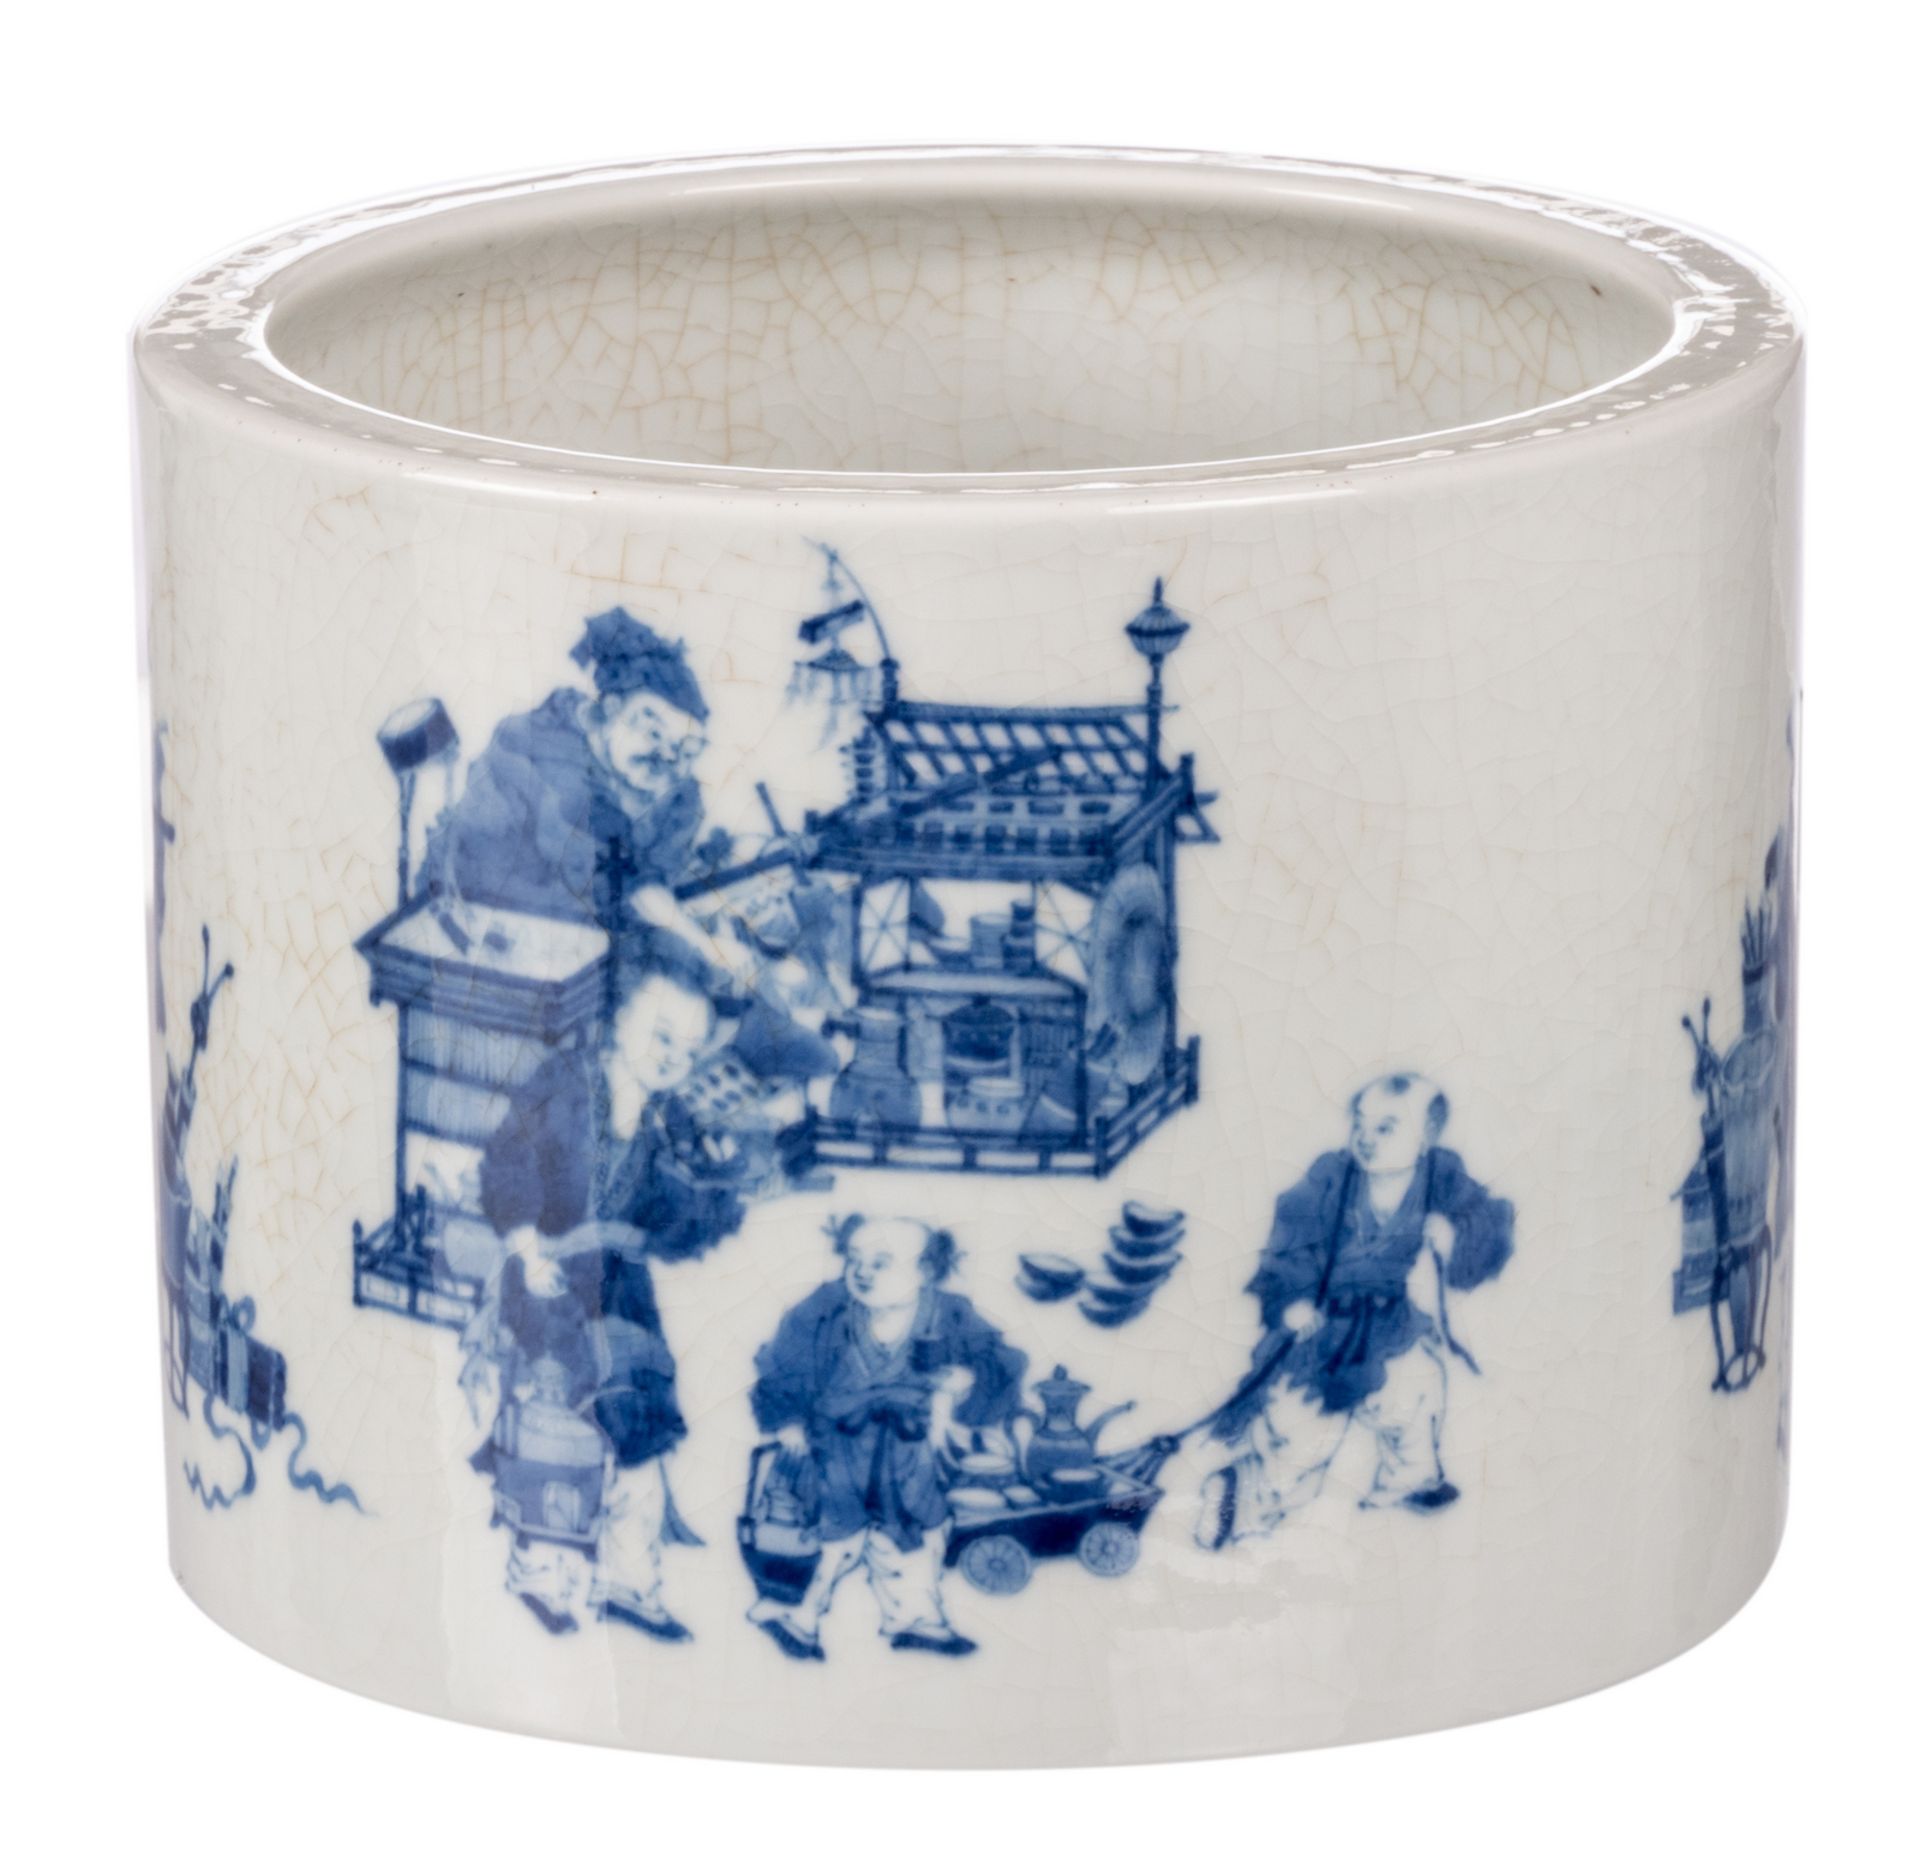 A Chinese blue and white brushpot, decorated with animated scenes, marked, 20thC, H 15 - Diameter 20